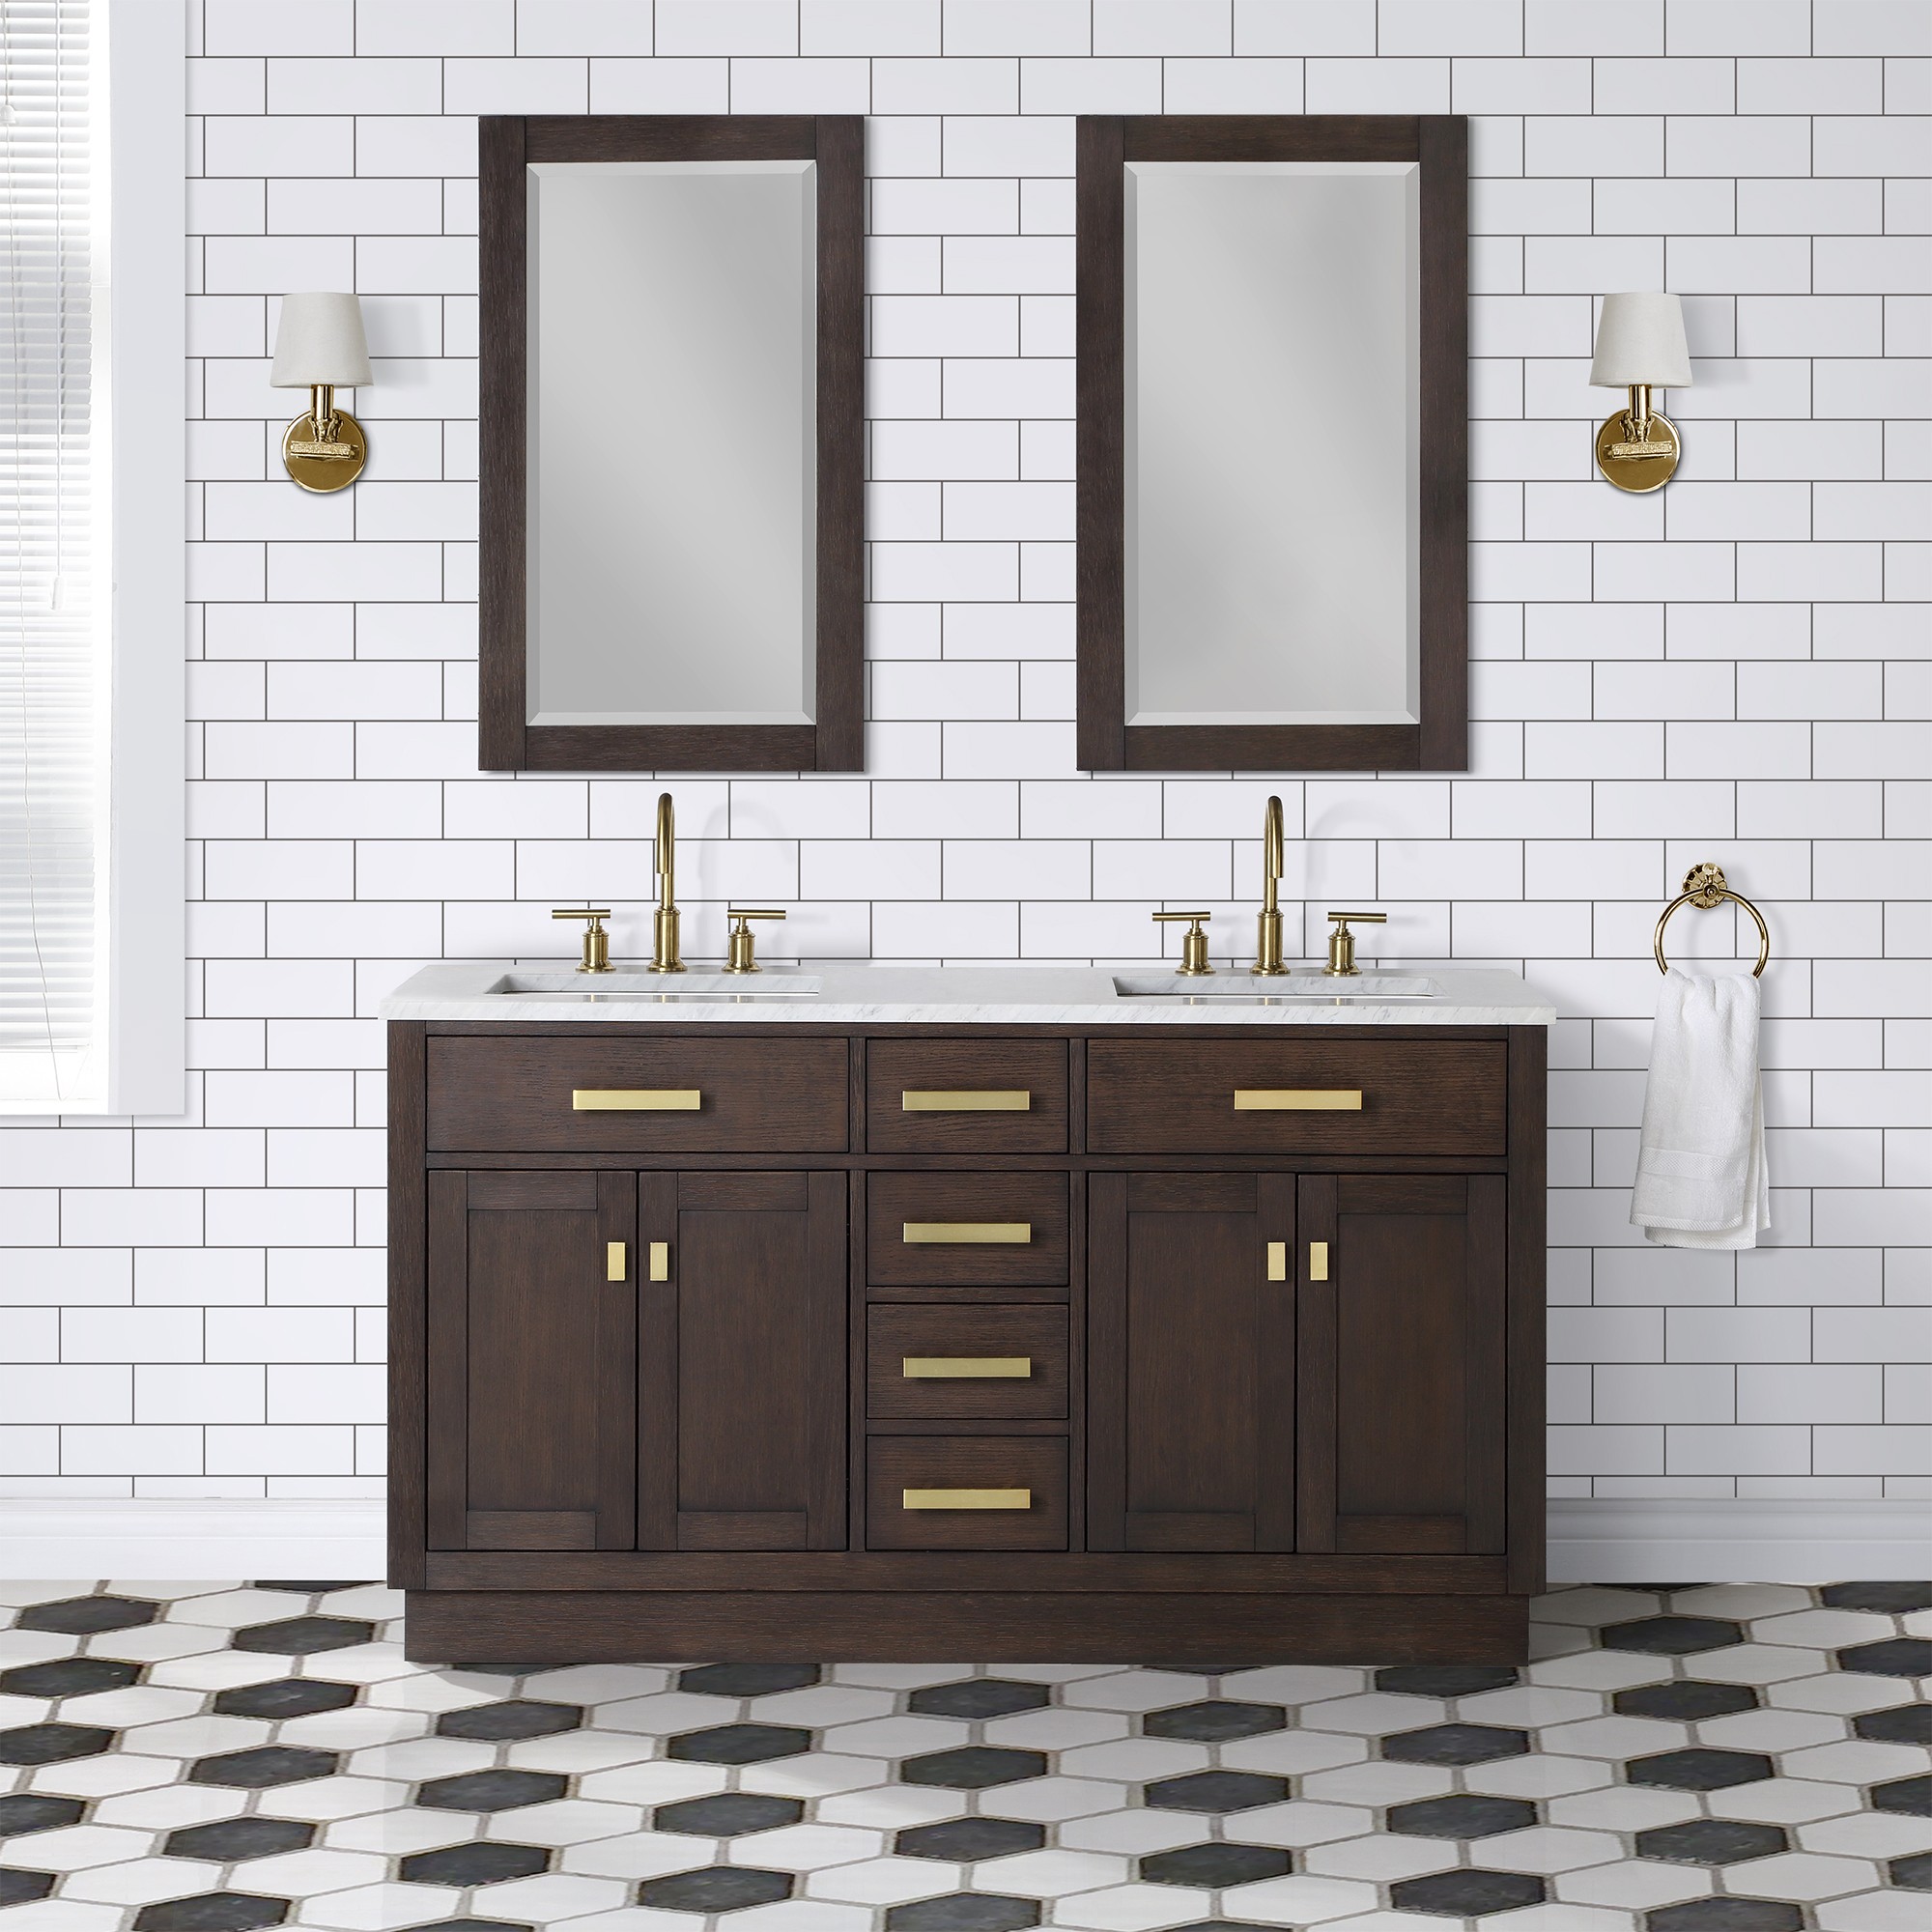 WATER-CREATION CH60CW06BK-R21000000 CHESTNUT 60 INCH DOUBLE BATHROOM VANITY WITH MIRRORS IN BROWN OAK